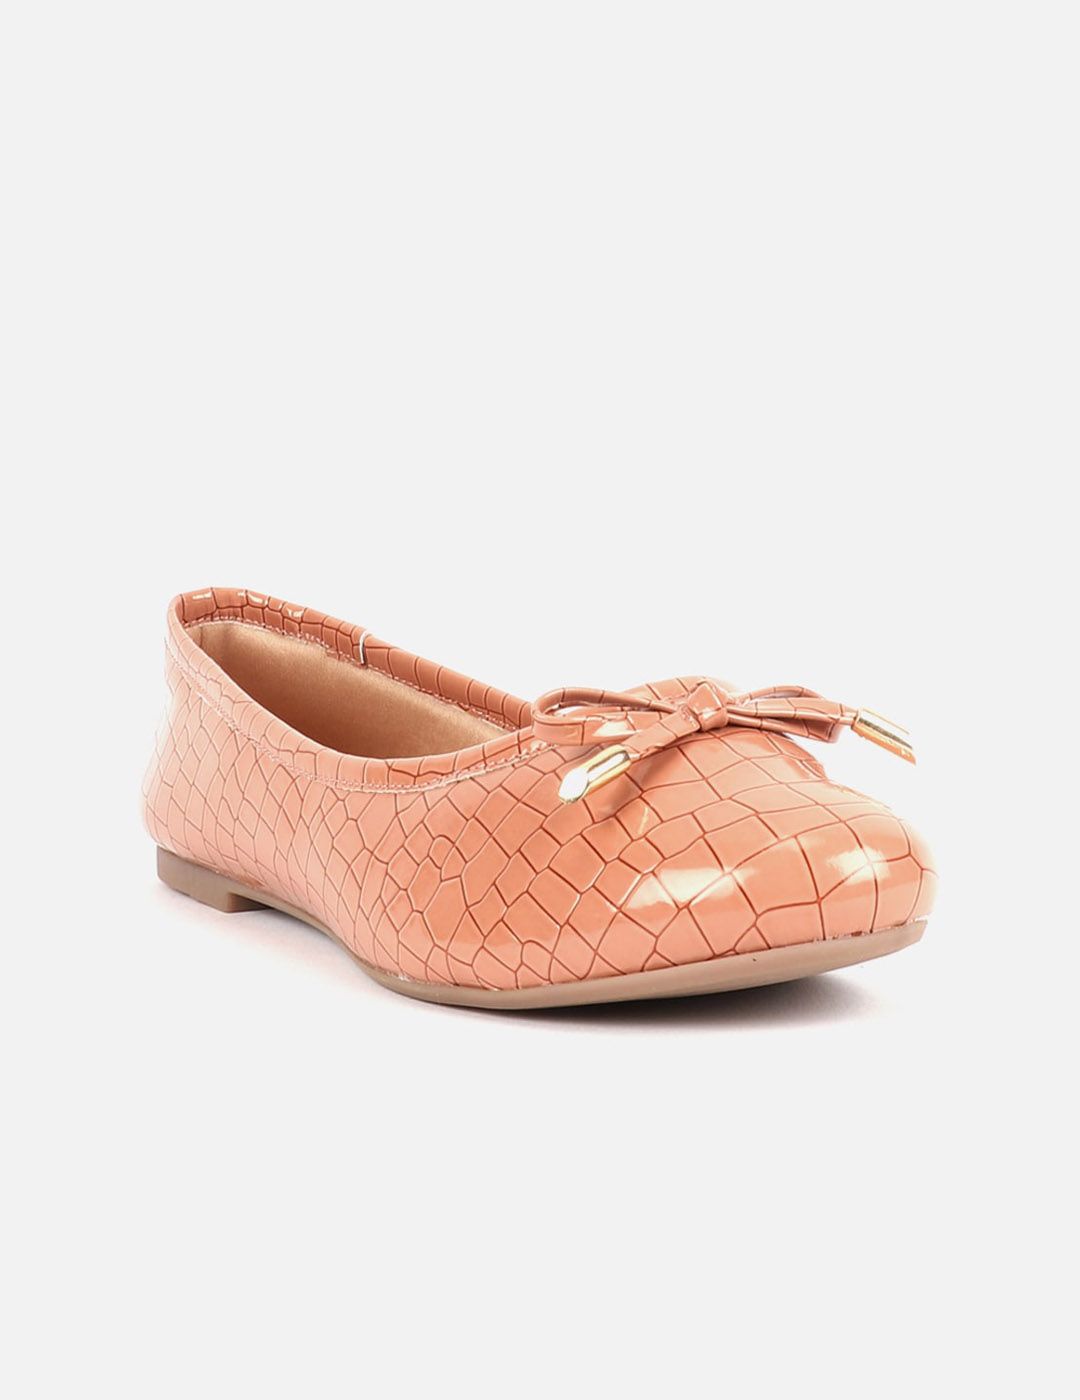 Carlton London Textured Ballerinas With Bows Price in India